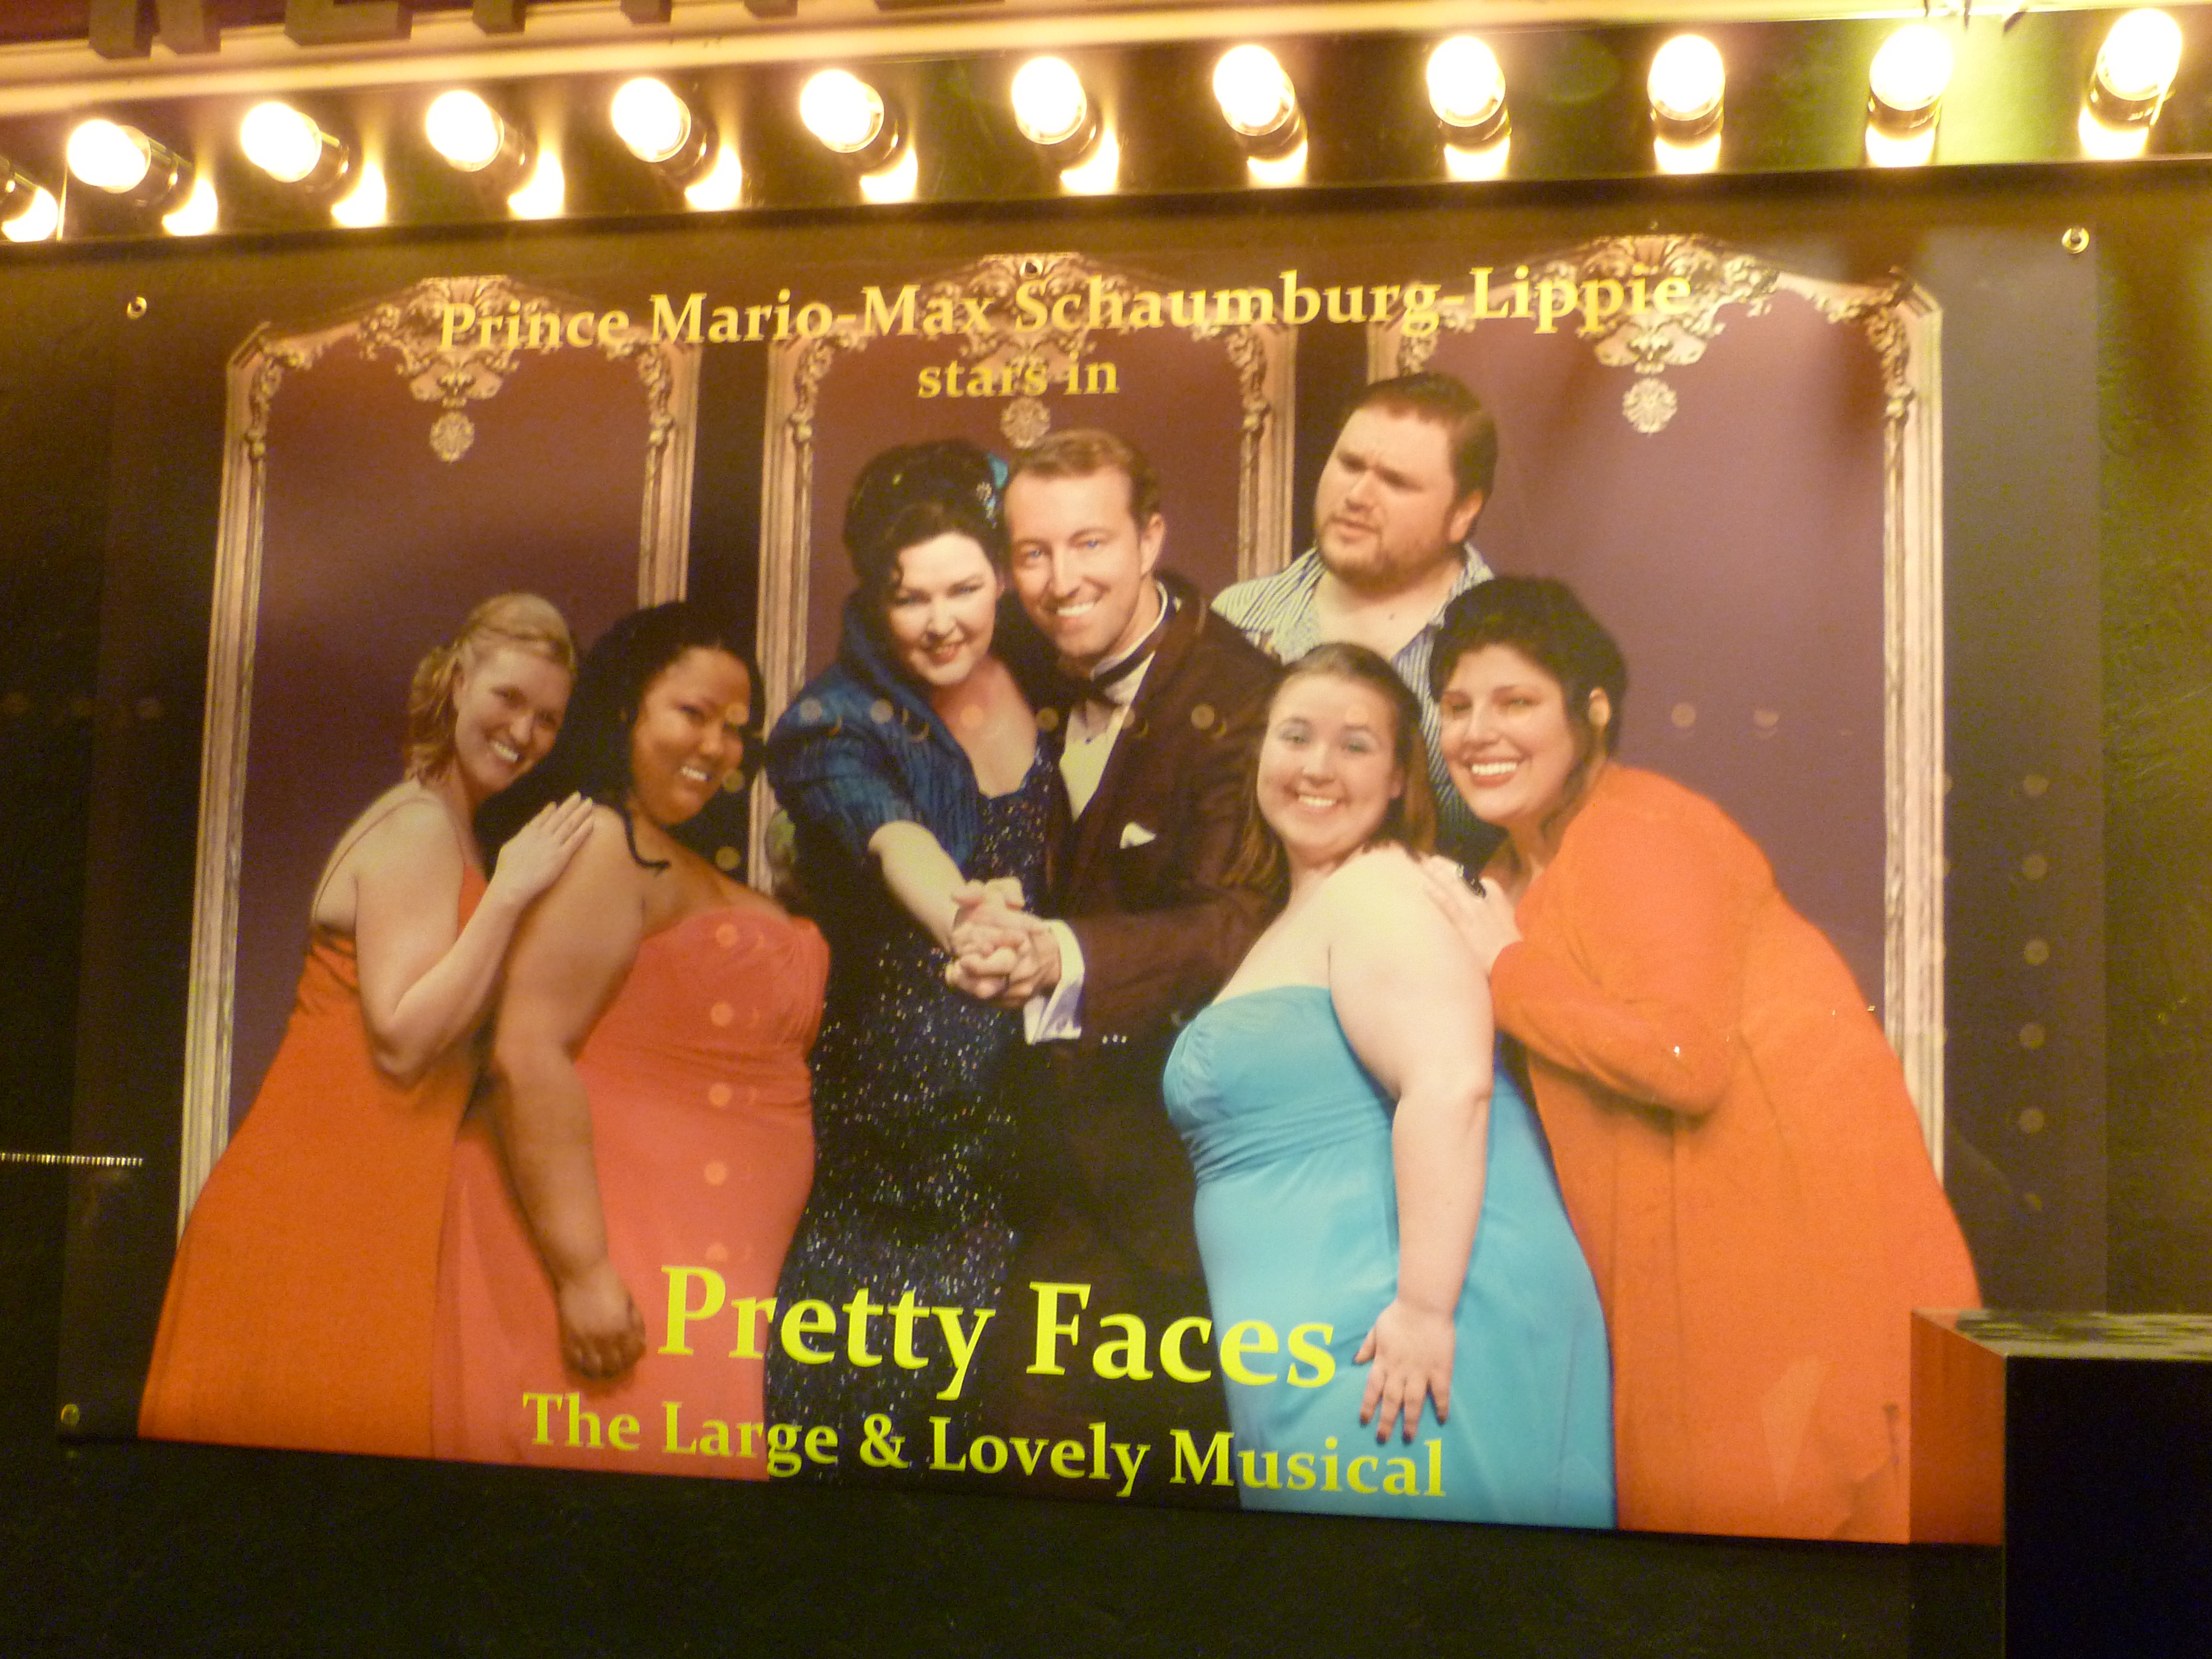 Theatre Billboard, Prince Mario-Max Schaumburg-Lippe staring the show Pretty Faces - The Large & Lovely Musical by Robert W. Cabell